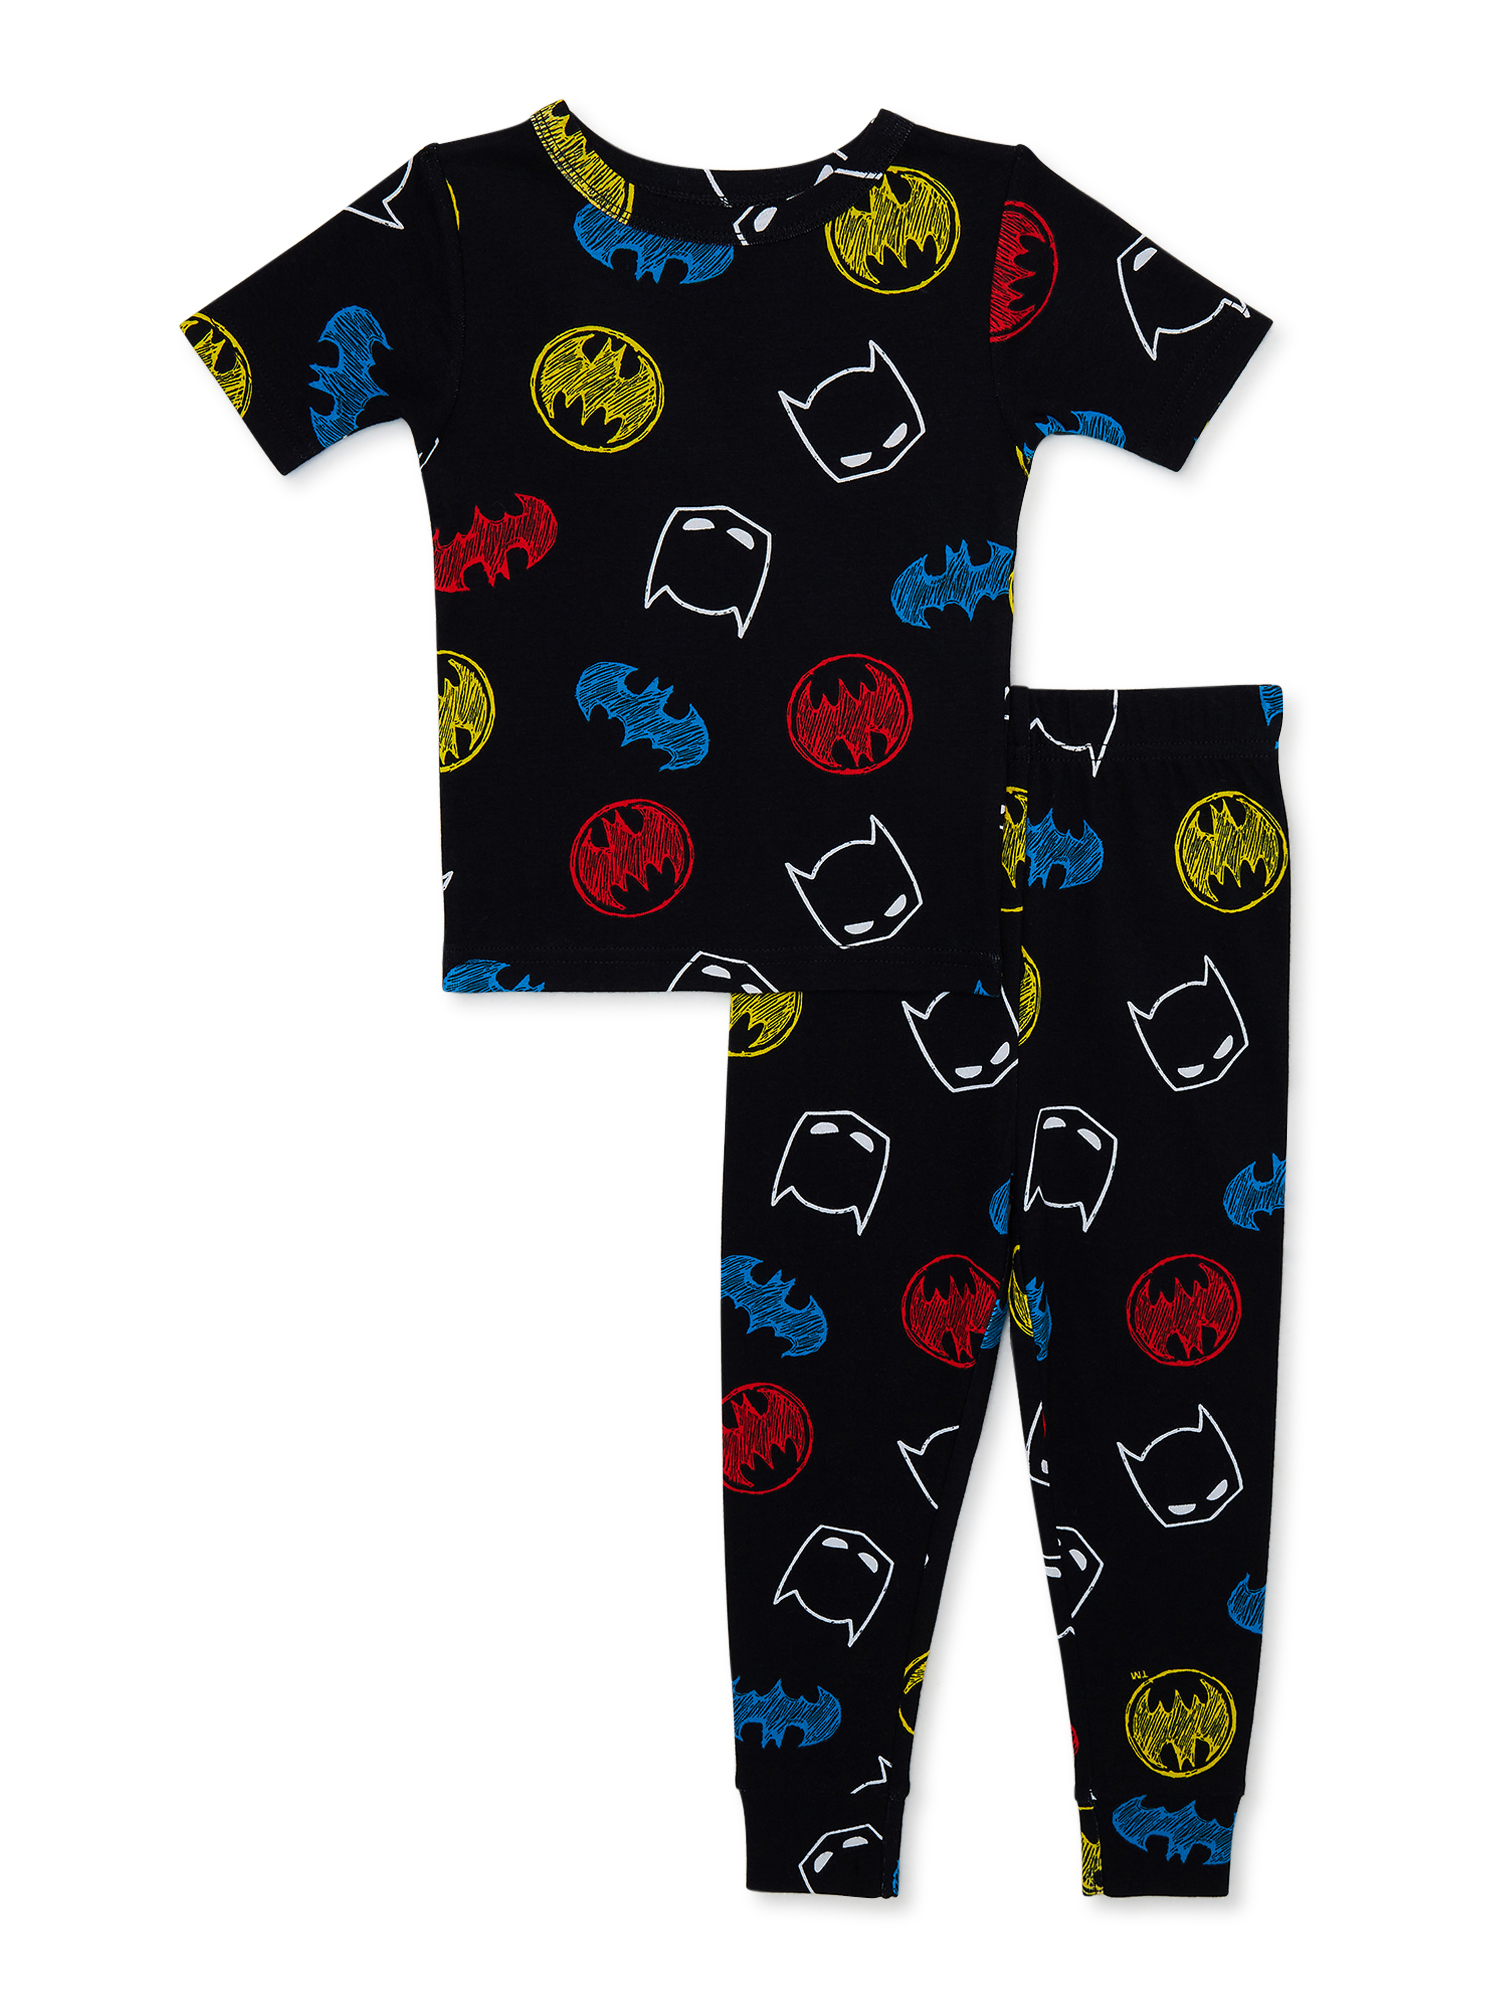 Character Toddler Snug-Fit Pajama Set, 2 Piece, Sizes 12M-5T - image 1 of 4